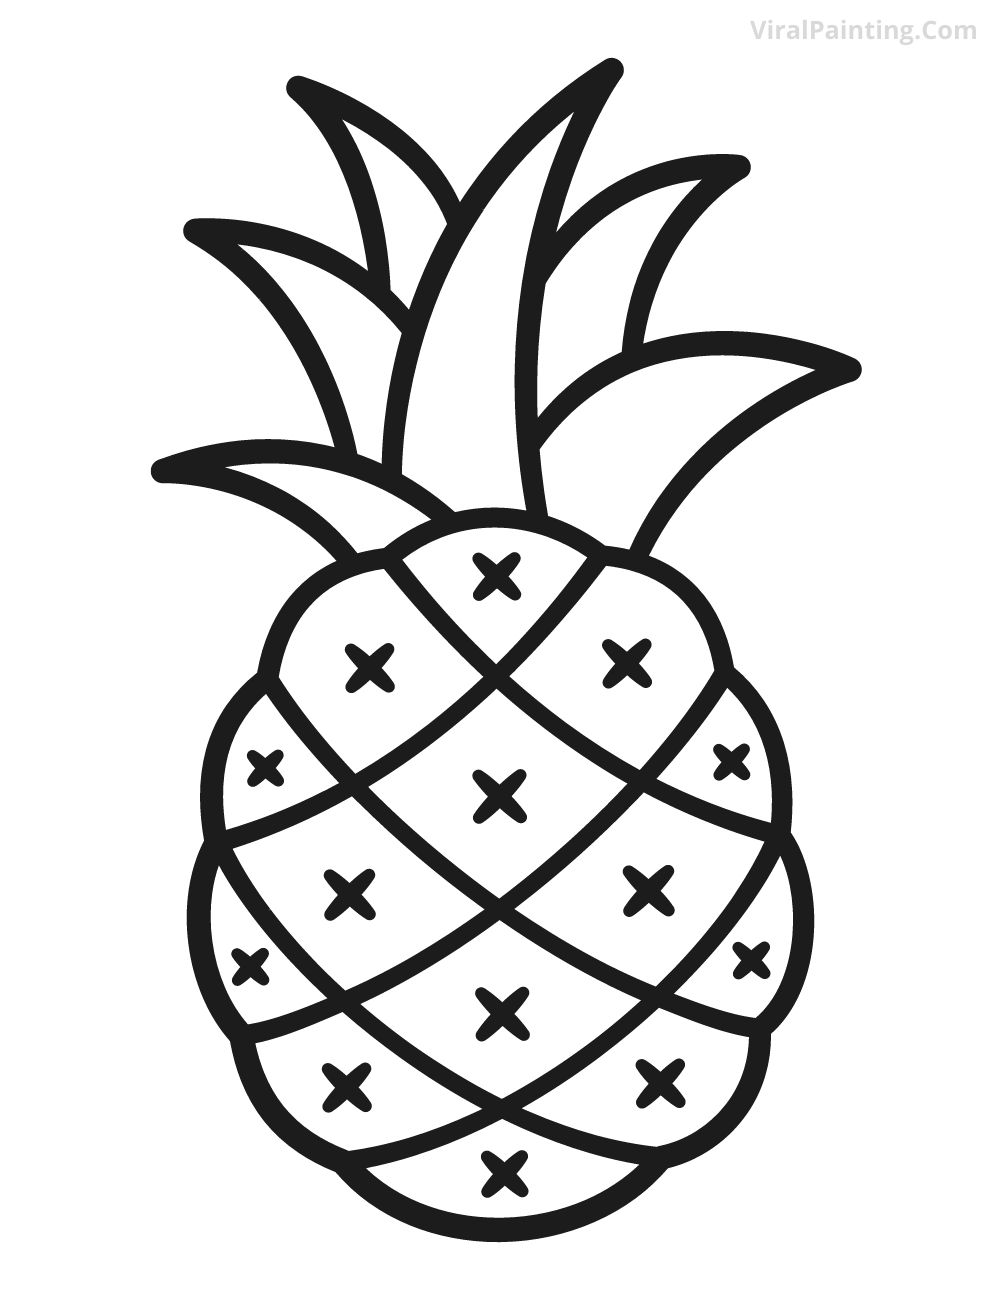 Simple and Easy pineapple drawing ideas for experts (7)